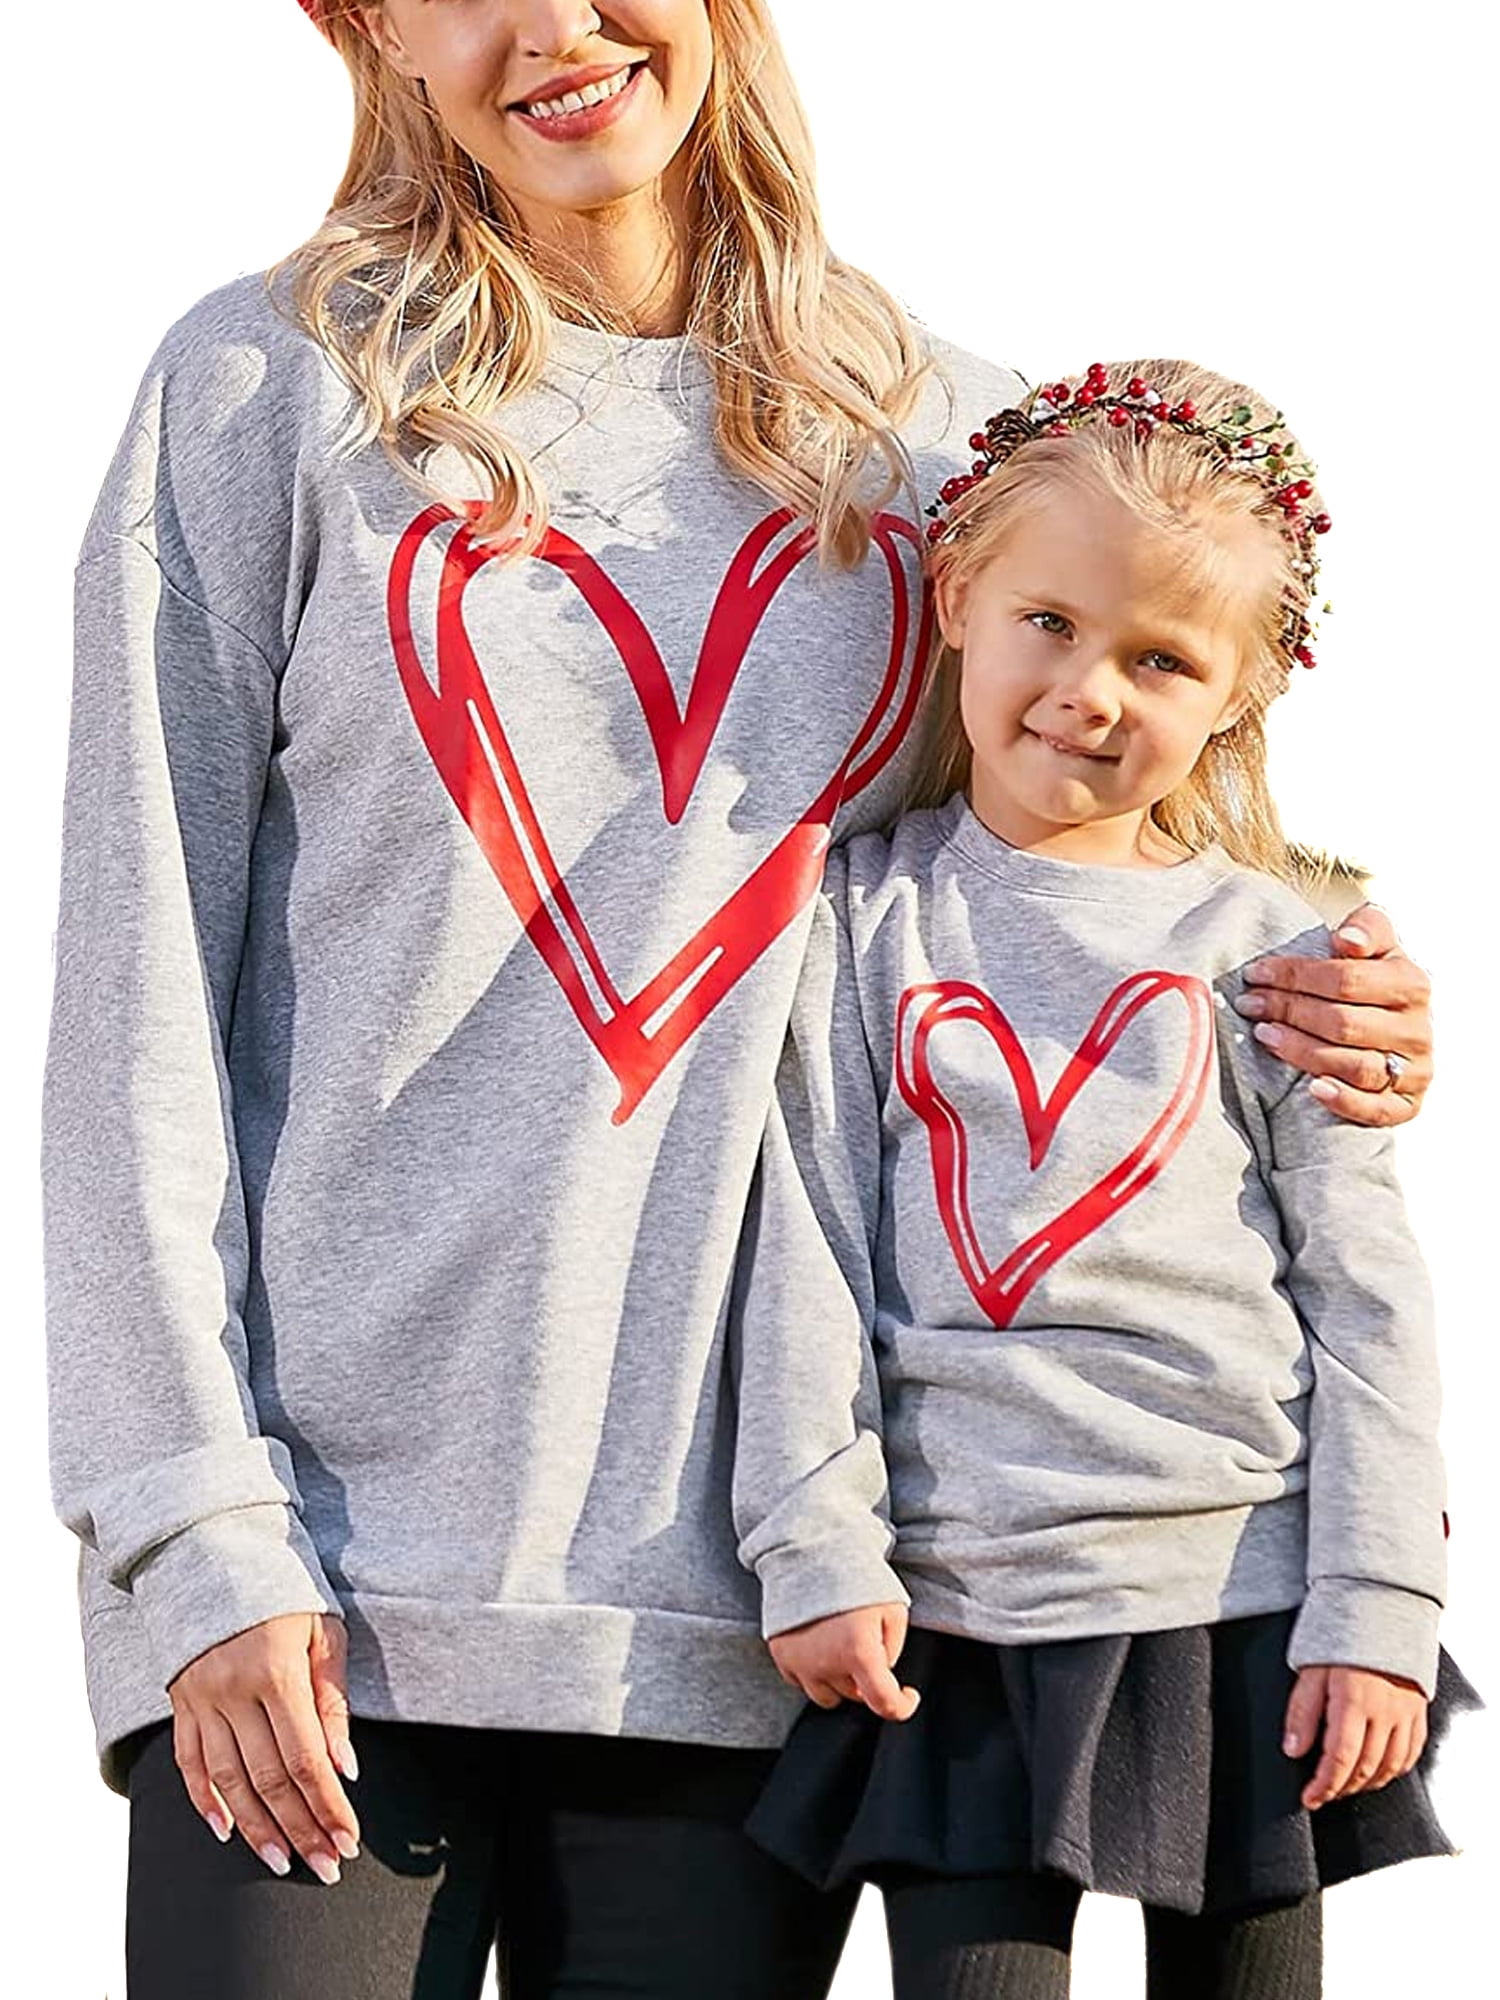 Mother Daughter Matching Valentine Days Outfits Women Girls Love Heart Long Sleeve Pullover T-Shirt Tops Blouse 